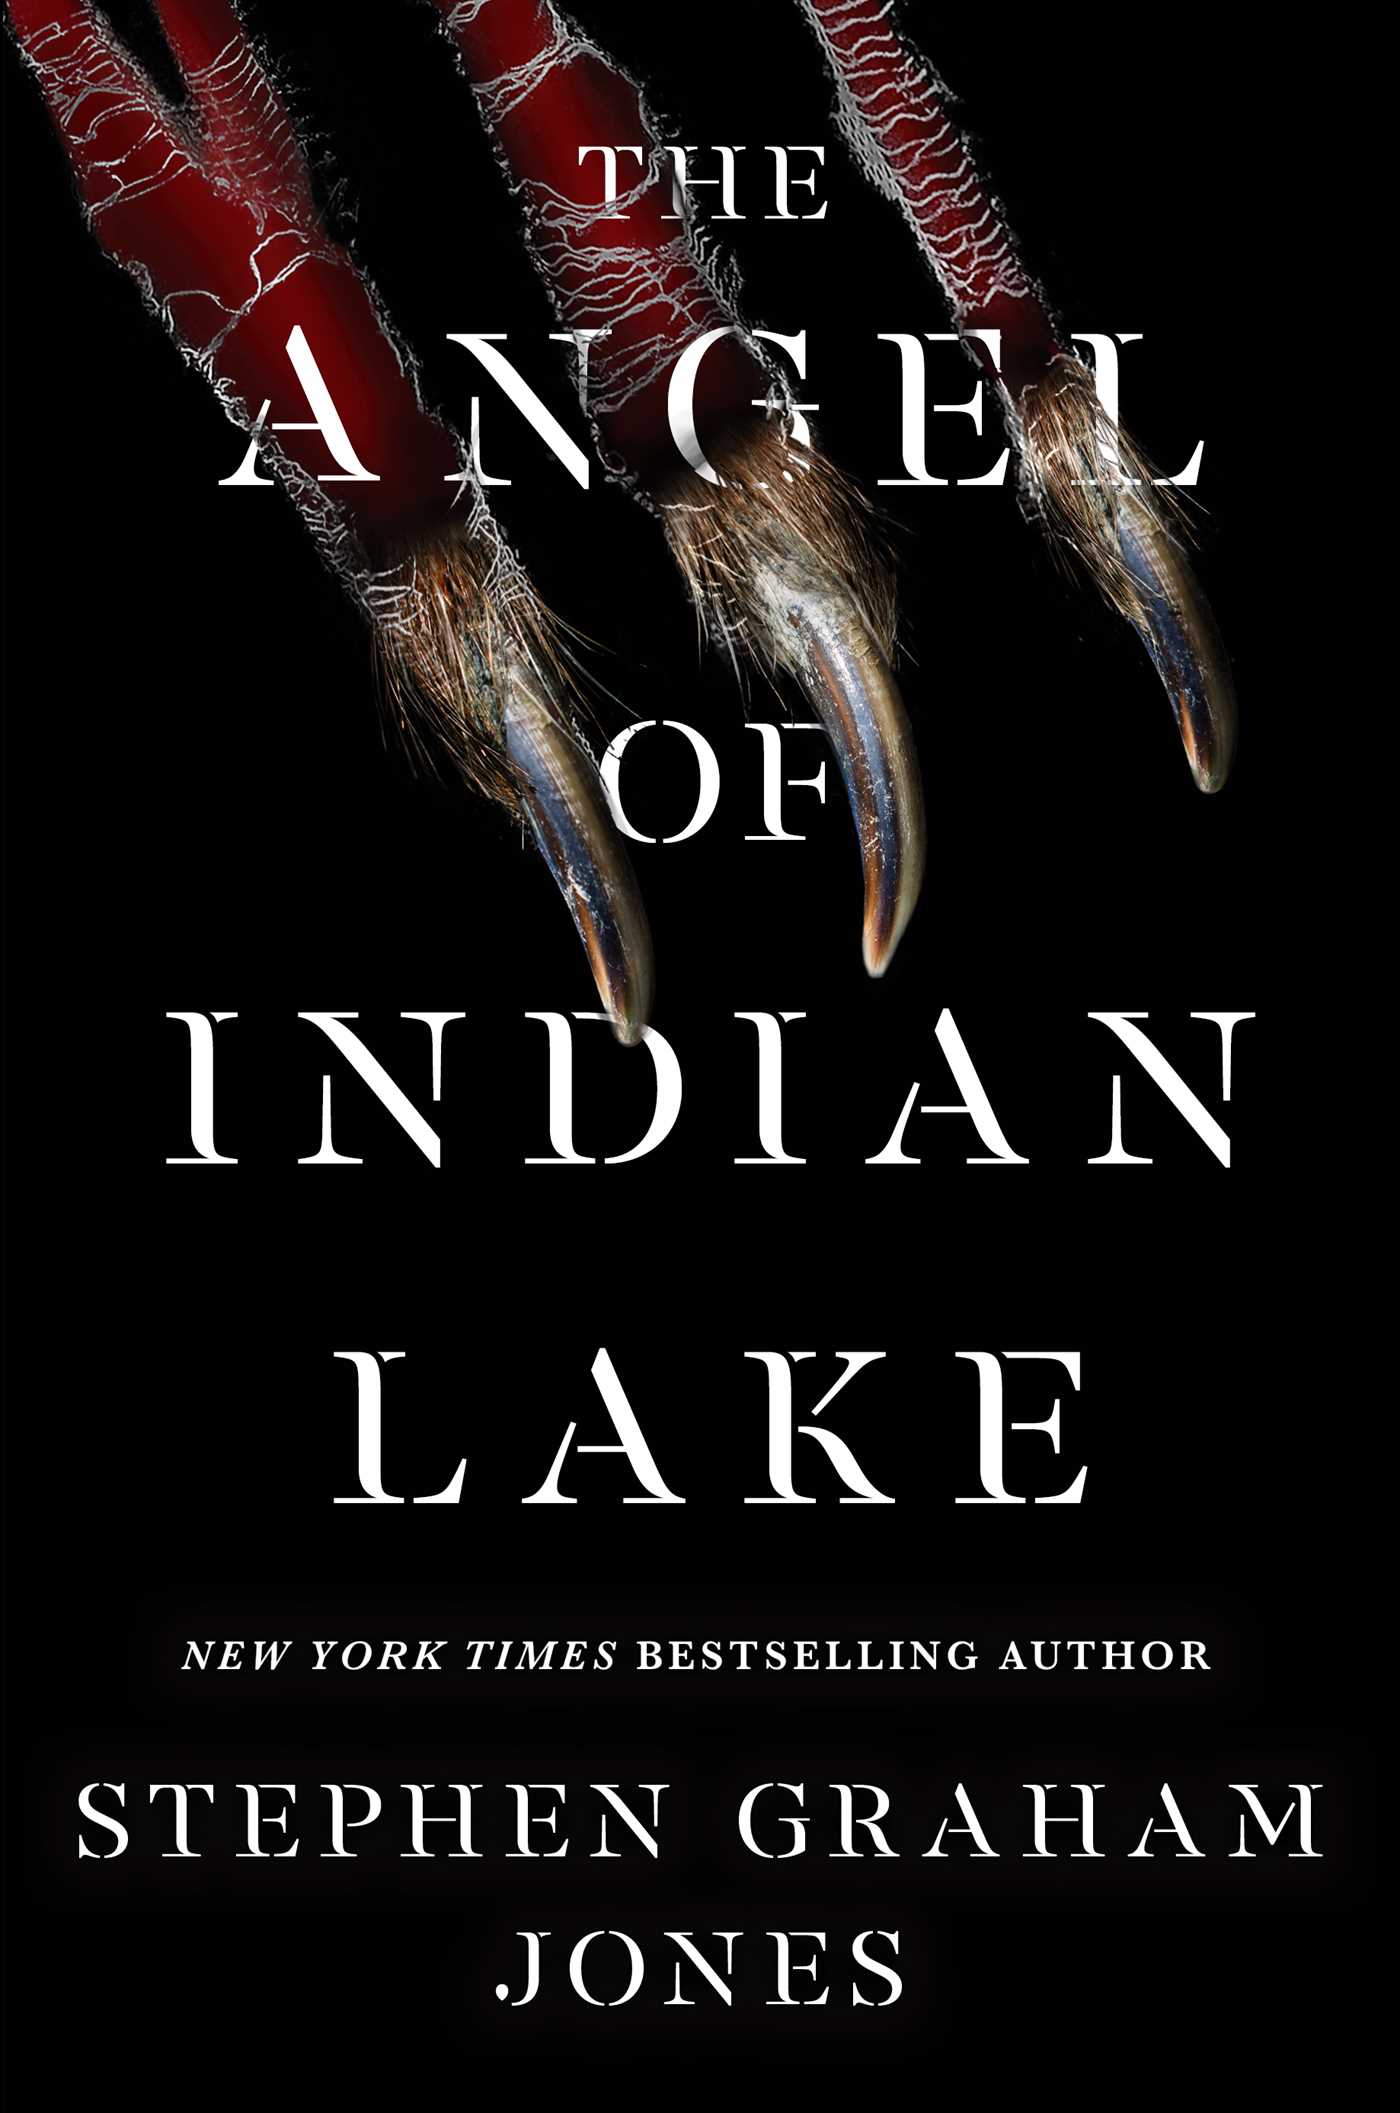 The Angel of Indian Lake (The Indian Lake Trilogy, #3)